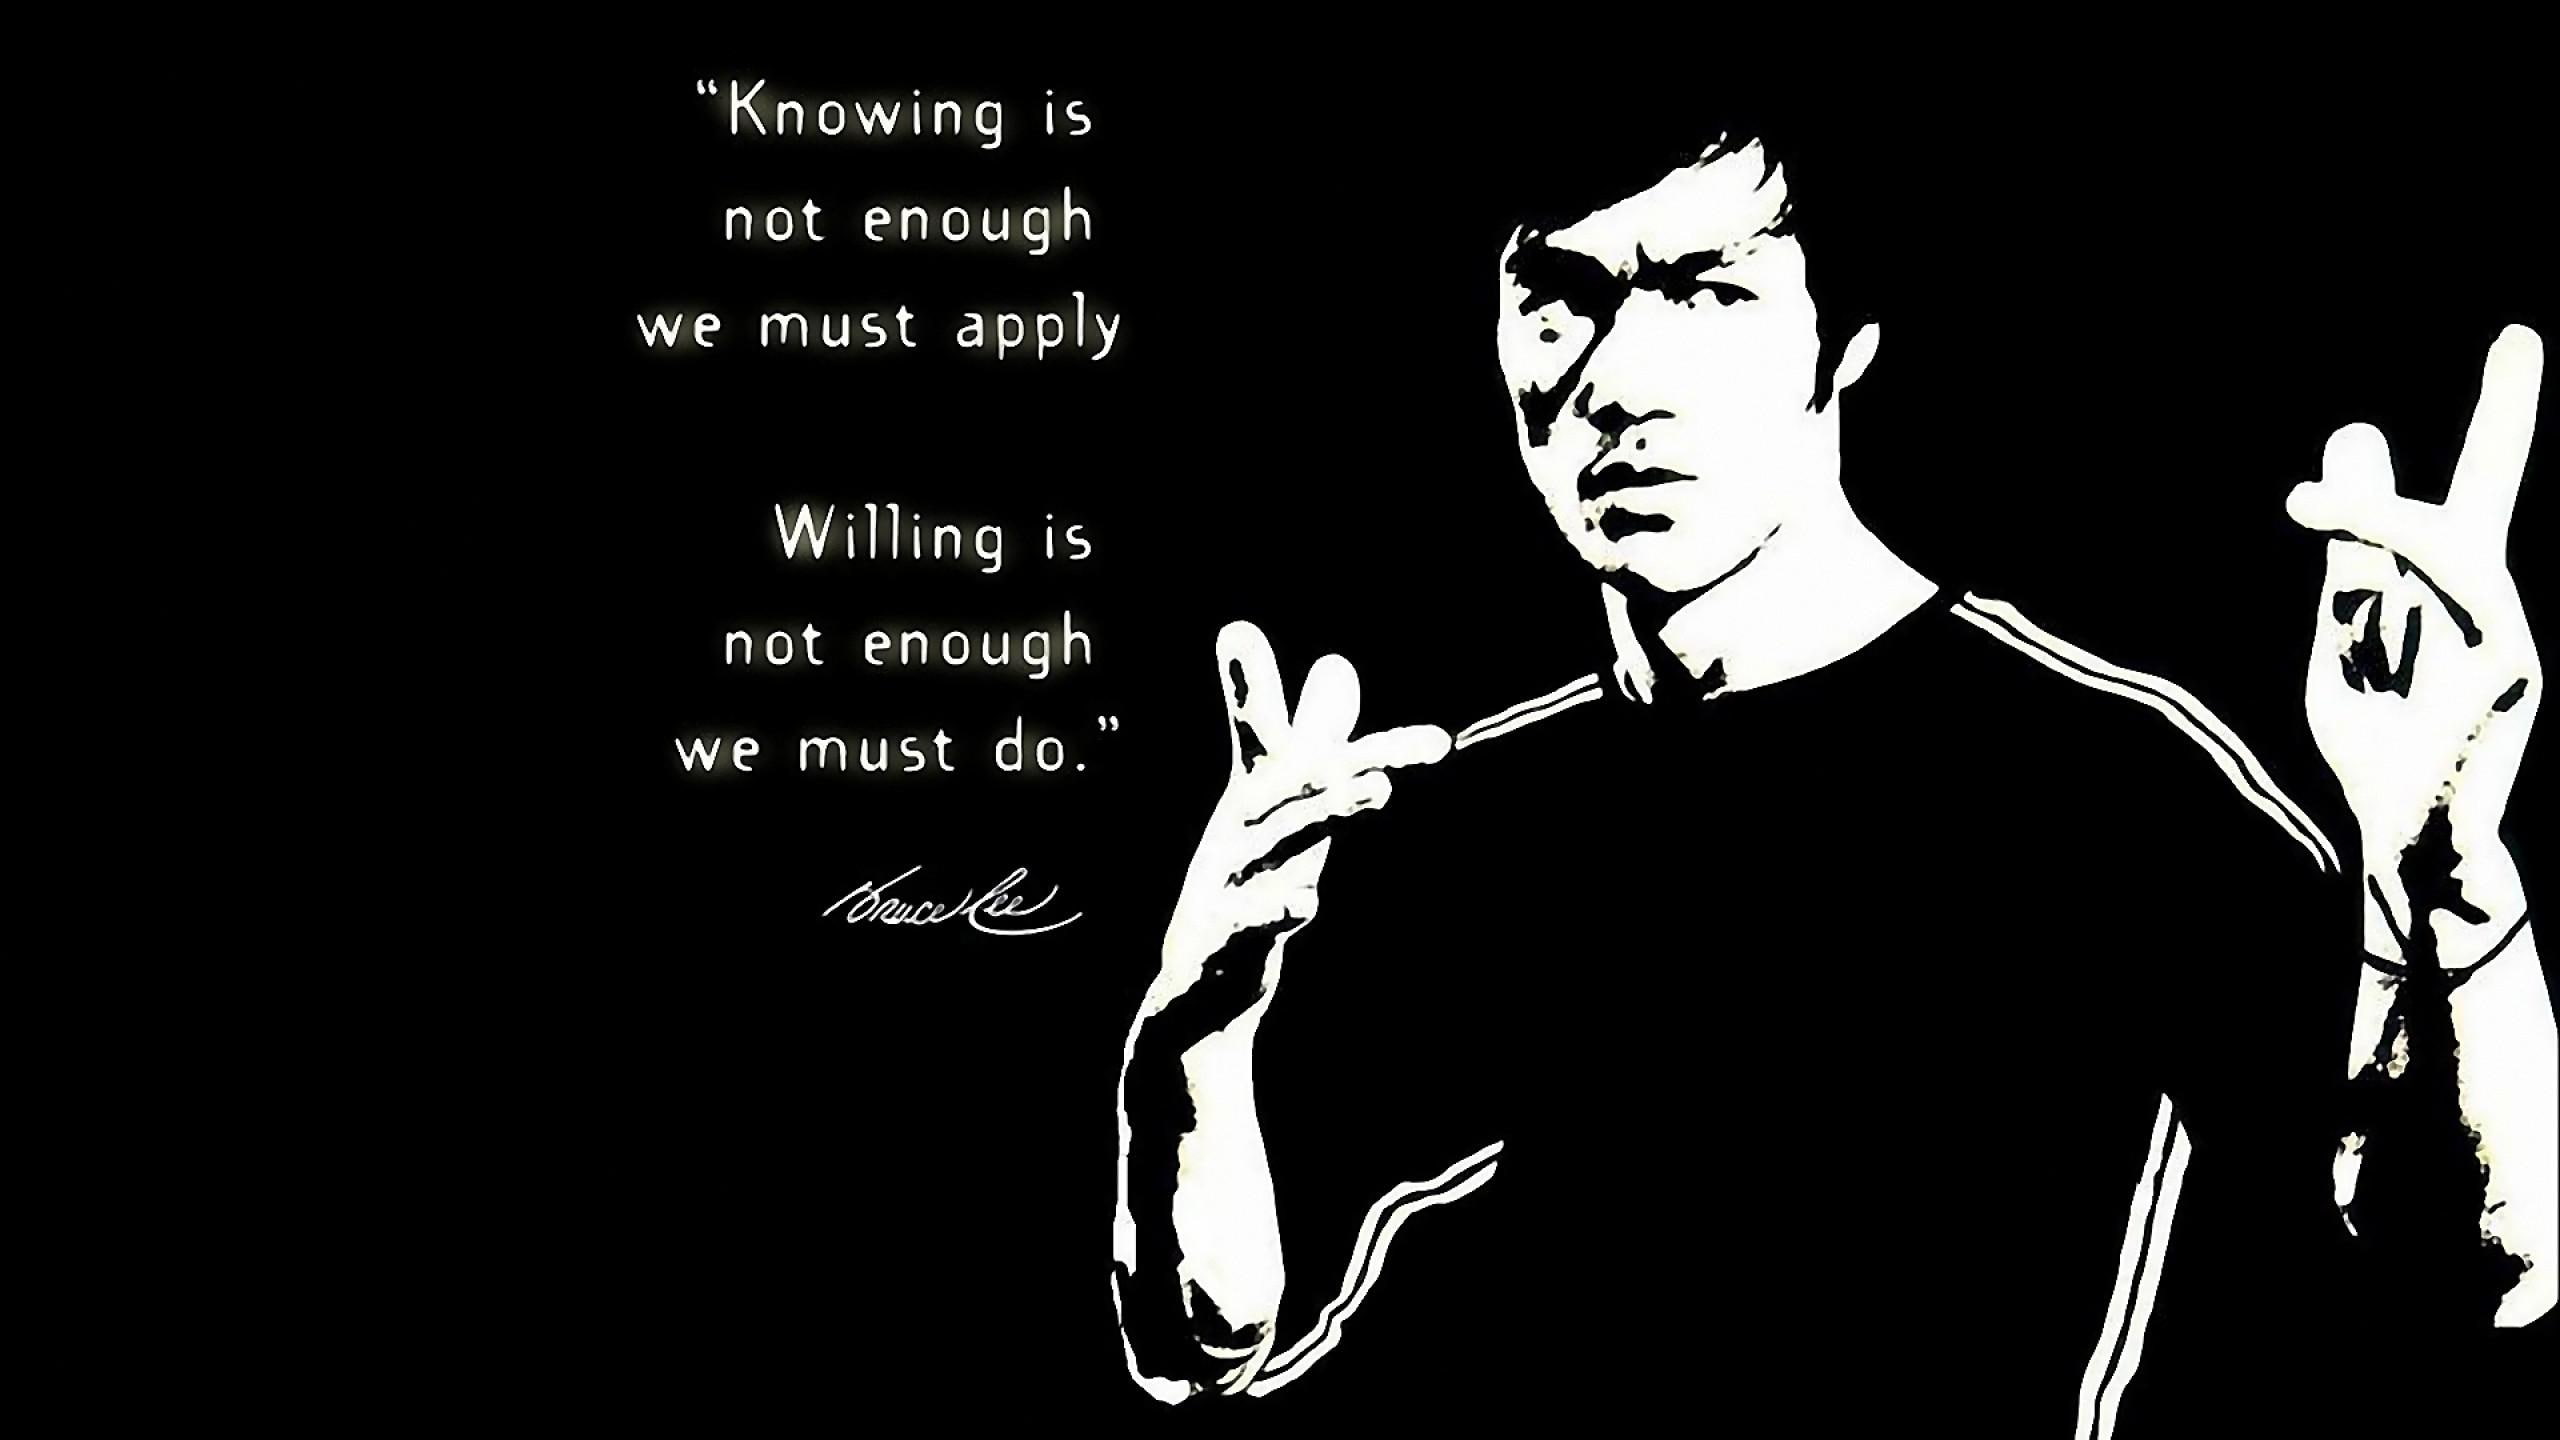 Bruce Lee quote, knowing is not enough we must apply willing is not enough we must do. bruce lee quote